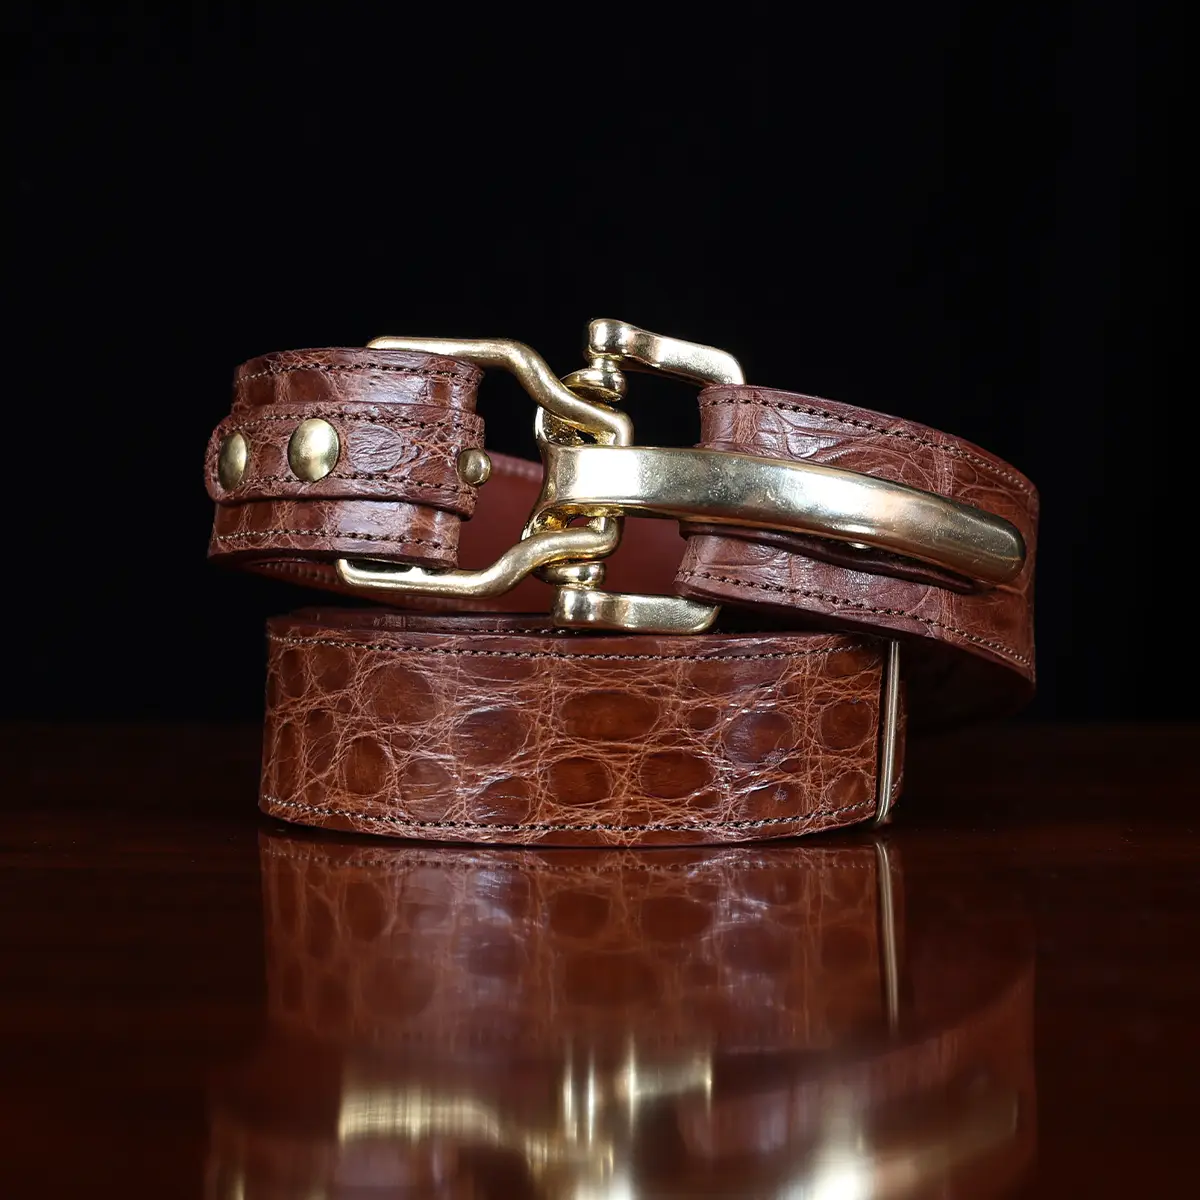 No. 5 Cinch Belt in brown American Alligator and brass buckle - ID 001 - front coiled view on black background